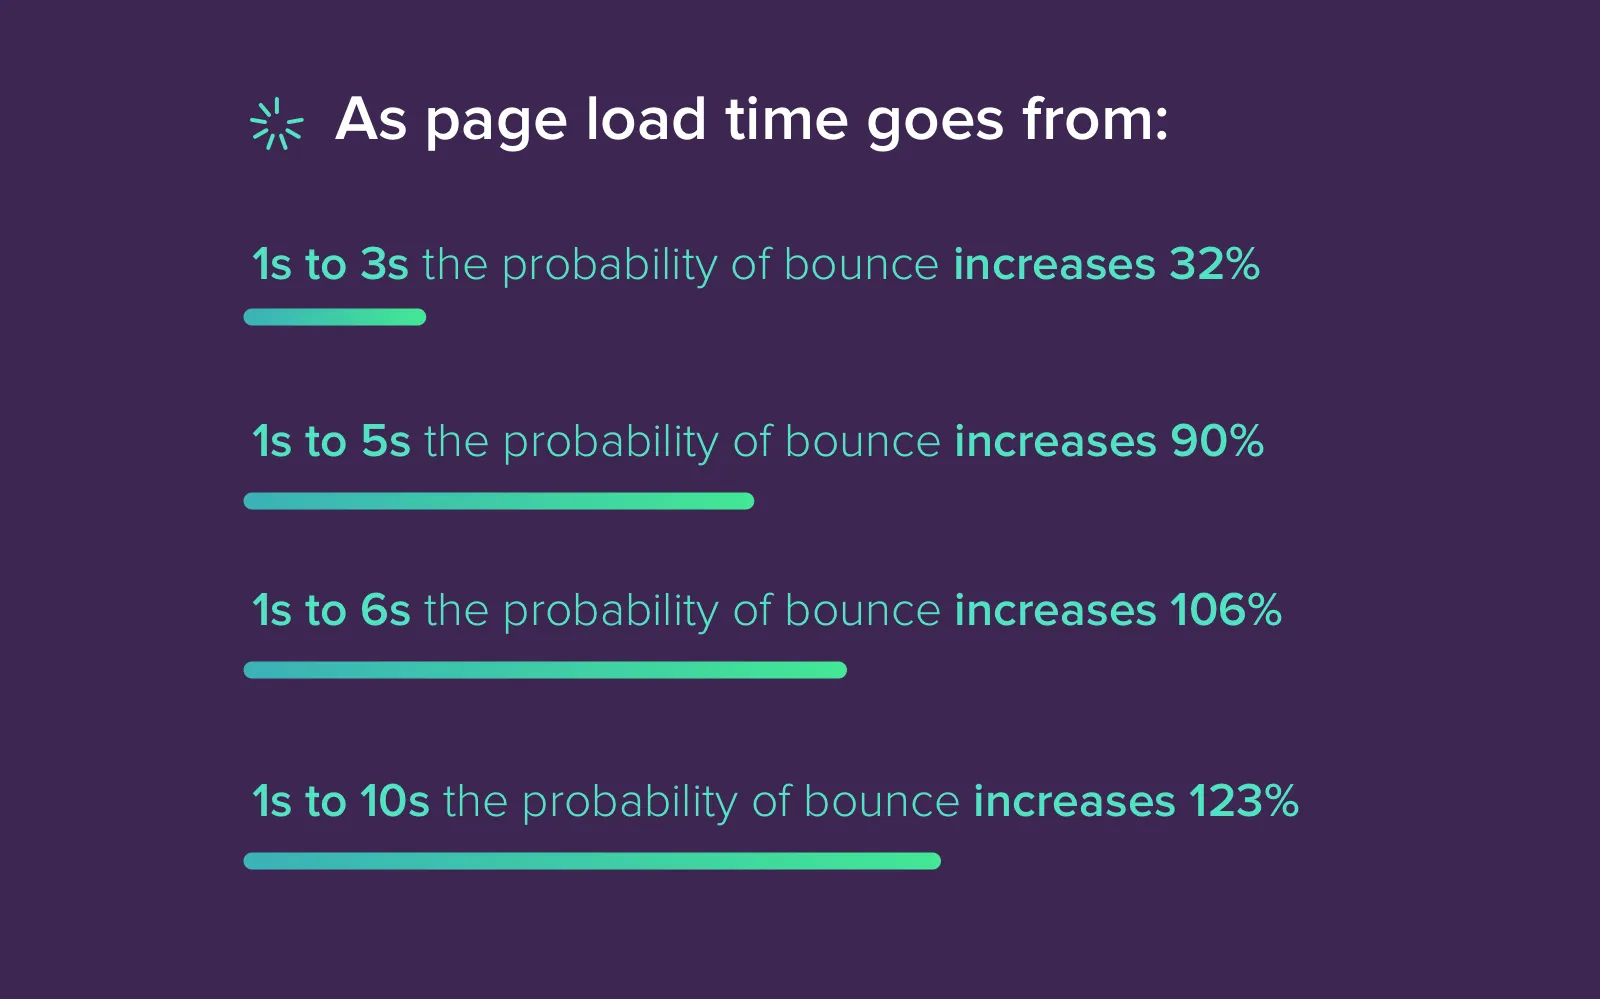 Statistics from Google on how website load speed optimization influences the bounce increases